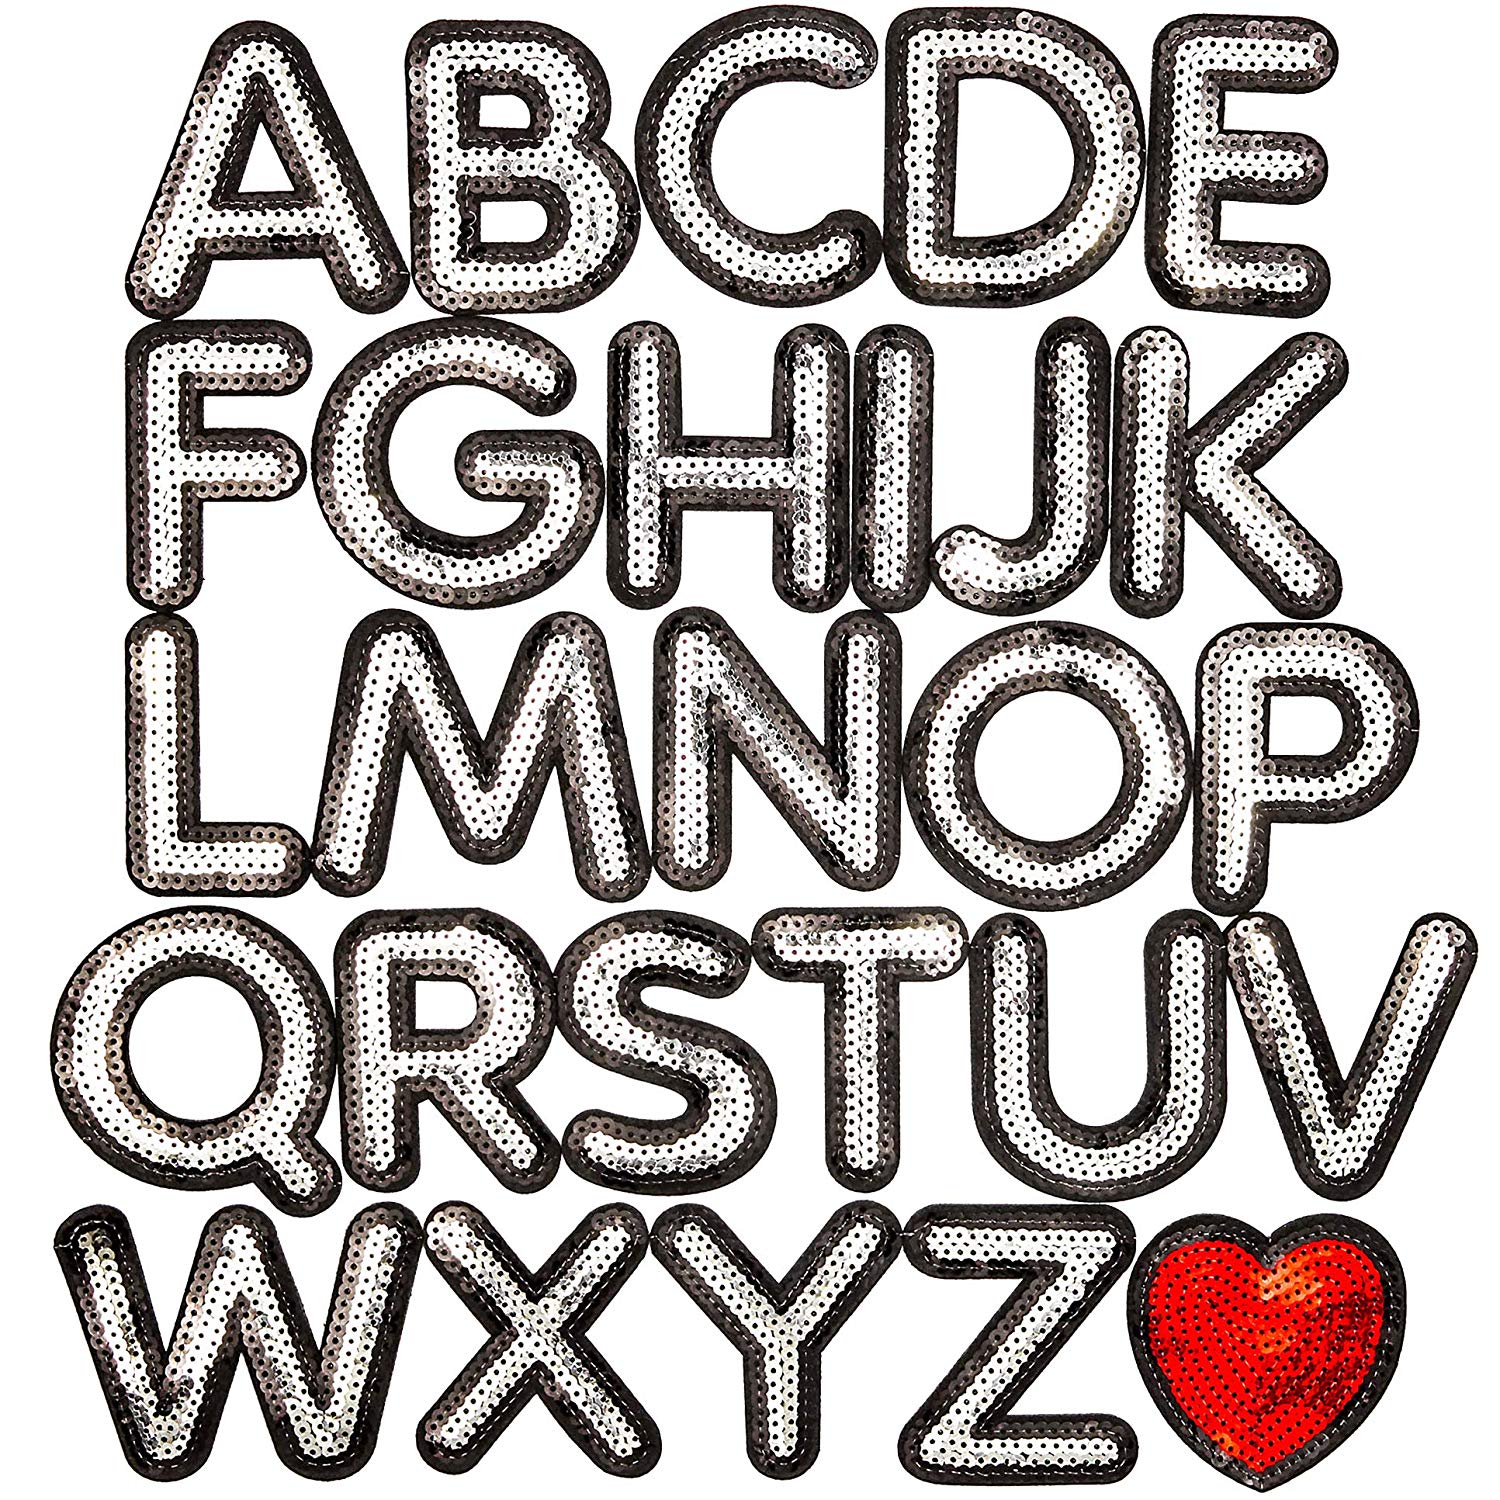 ALPHABET LETTERS embroidered iron-on PATCH APPLIQUE - CHOOSE BLACK, RED or  WHITE